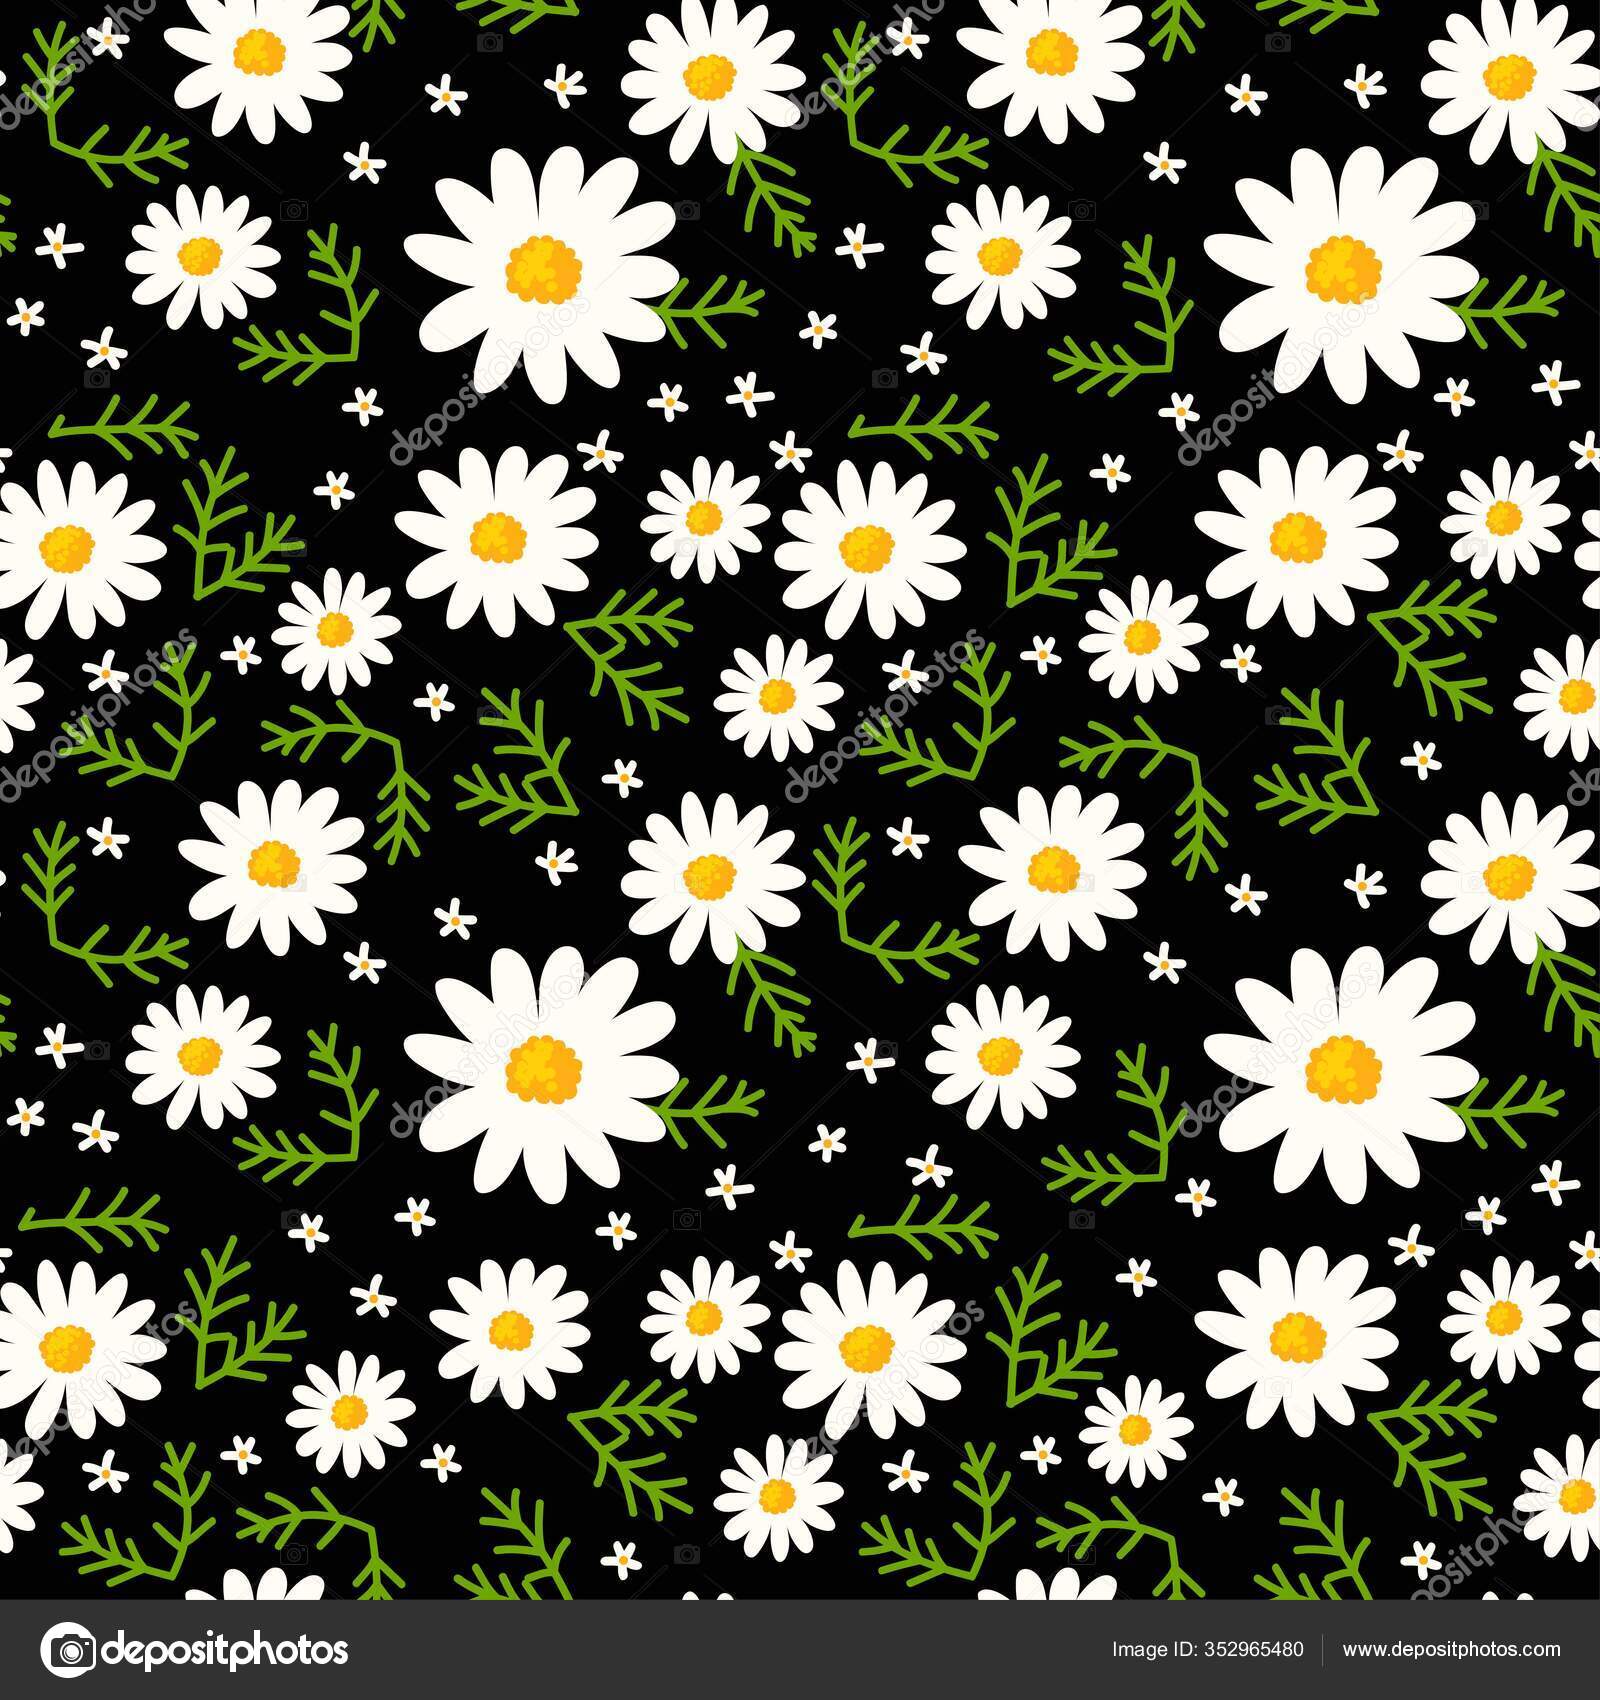 Daisy Seamless Pattern On Black Background Floral Ditsy Print With Small White Flowers And Green Leaves Chamomile Trend Design Great For Fashion Fabric Trend Textile And Wallpaper Vector Image By C